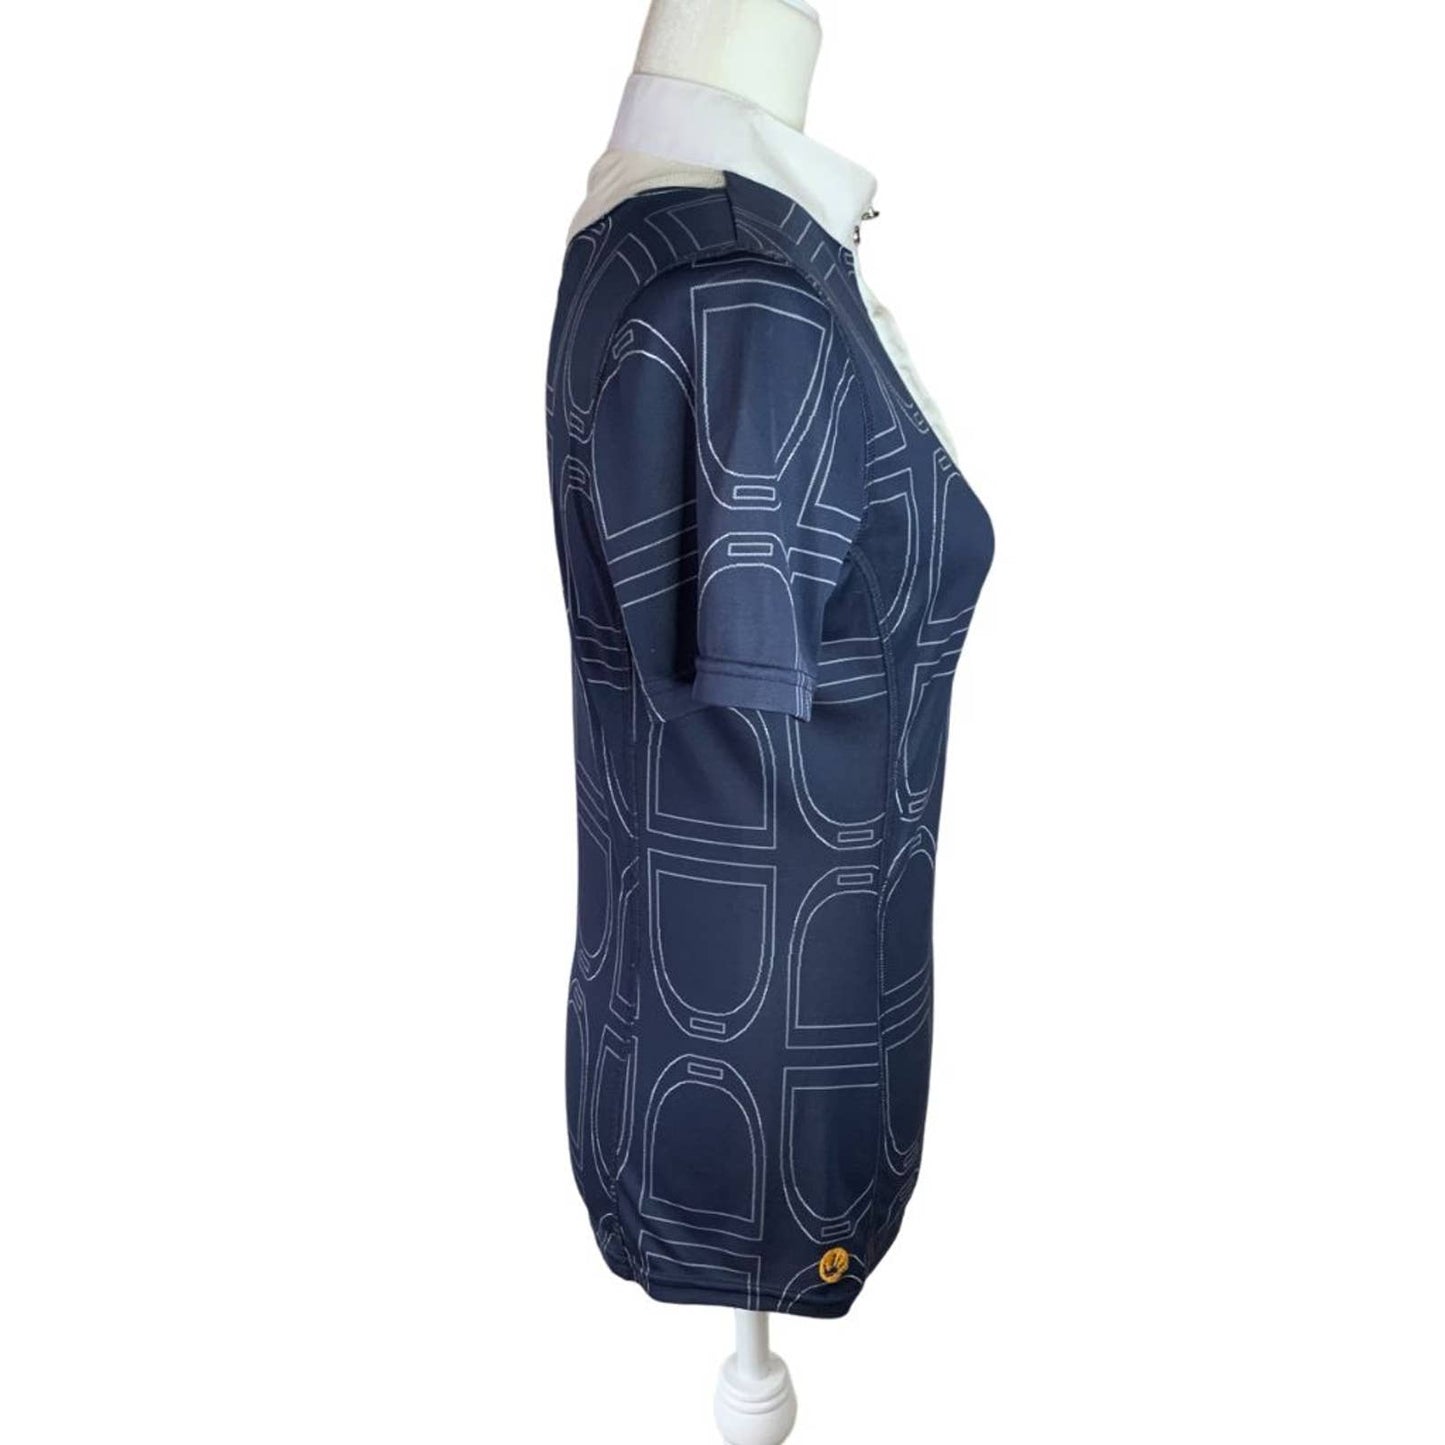 Cavallo Show Shirt in Navy - Woman's 10